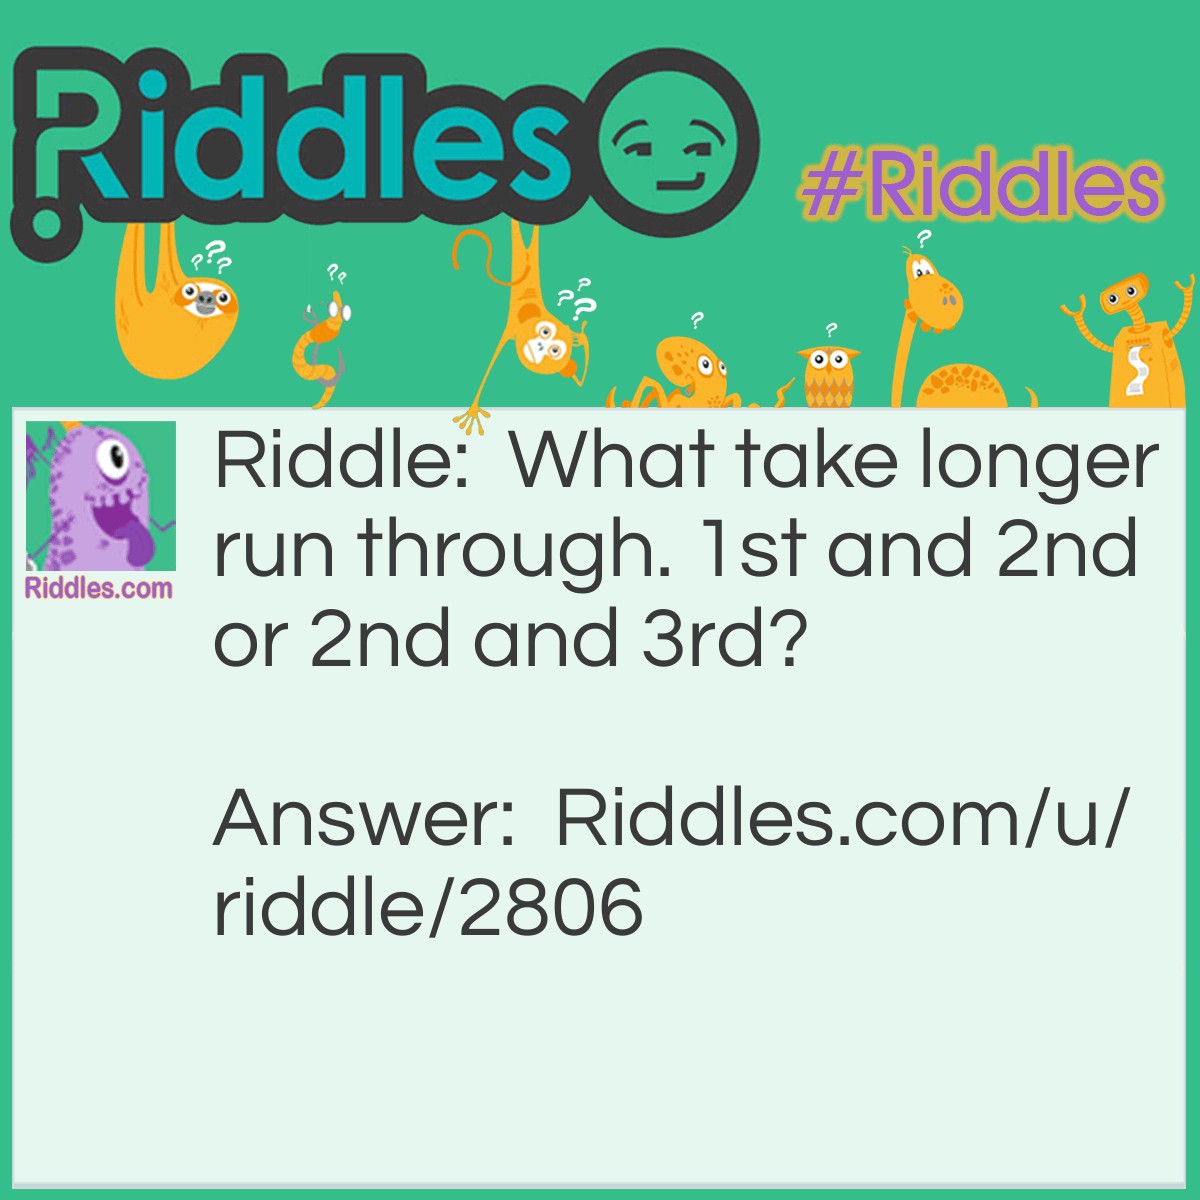 Riddle: What take longer run through. 1st and 2nd or 2nd and 3rd? Answer: 2nd and 3rd because you have to go through a shortstop.